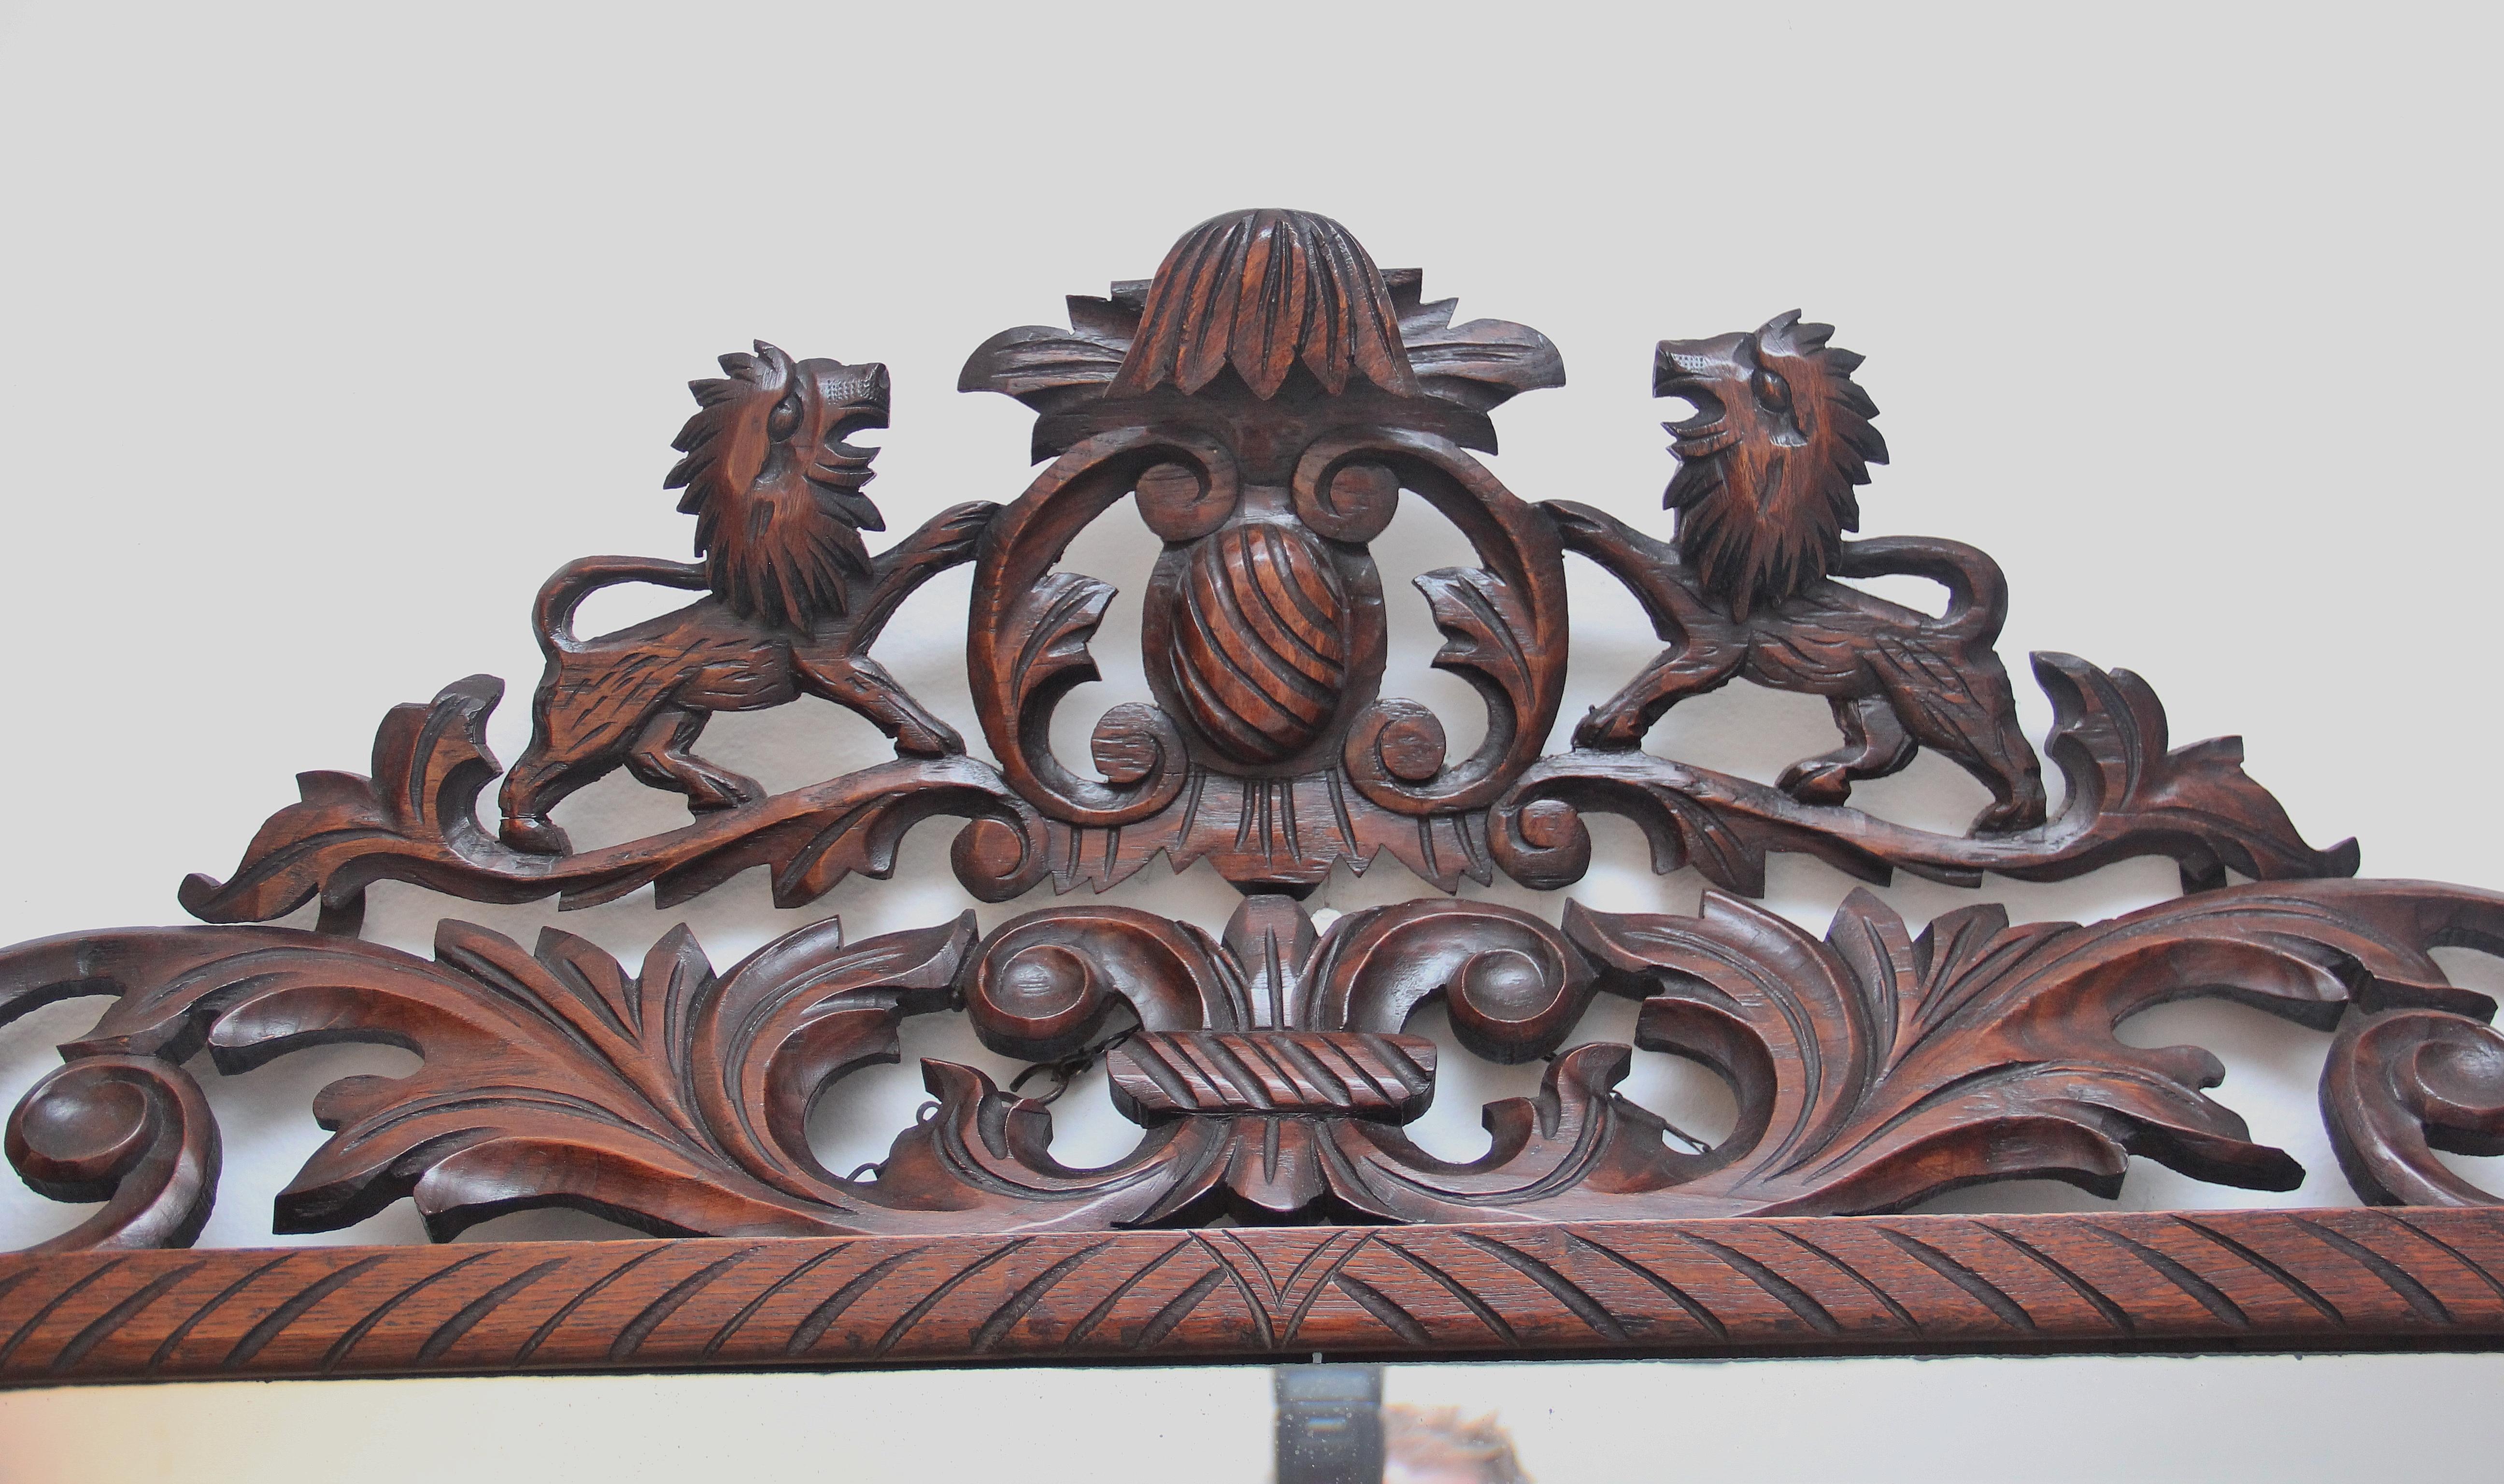 19th century highly decorative carved oak wall mirror, the bevelled edge glass mirror having a wonderfully intricate carved oak frame incorporating bold floral design, central motif at the top flanked either side by lions. In excellent condition and